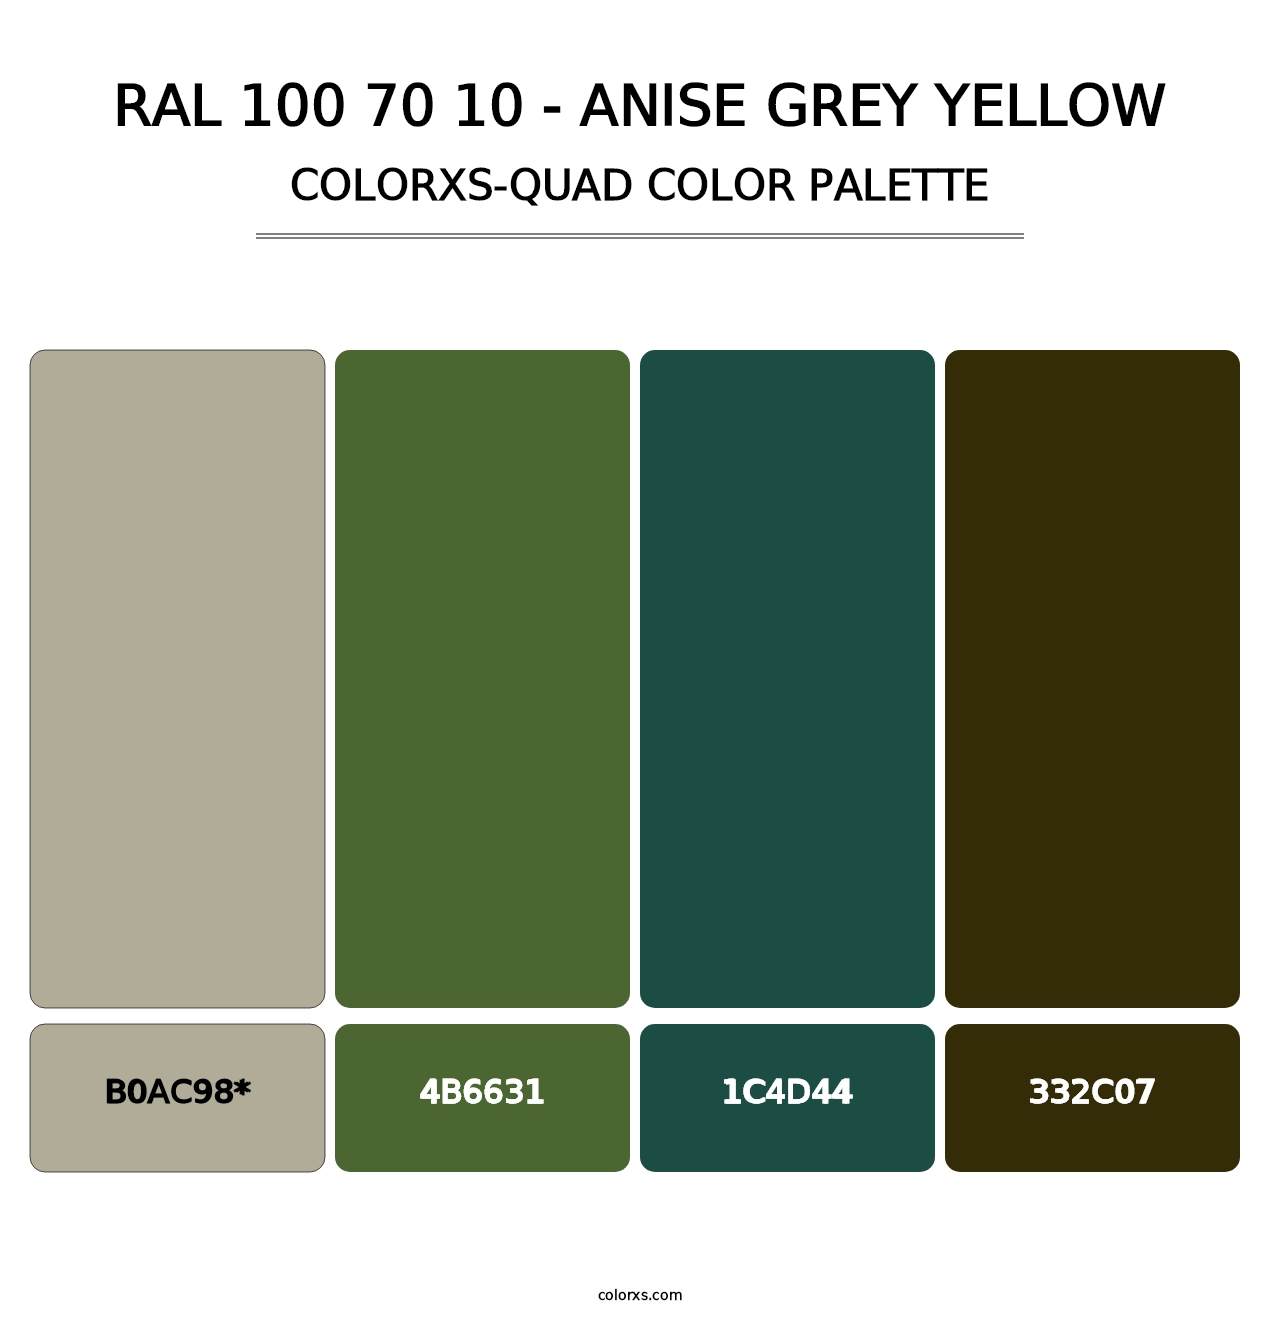 RAL 100 70 10 - Anise Grey Yellow - Colorxs Quad Palette